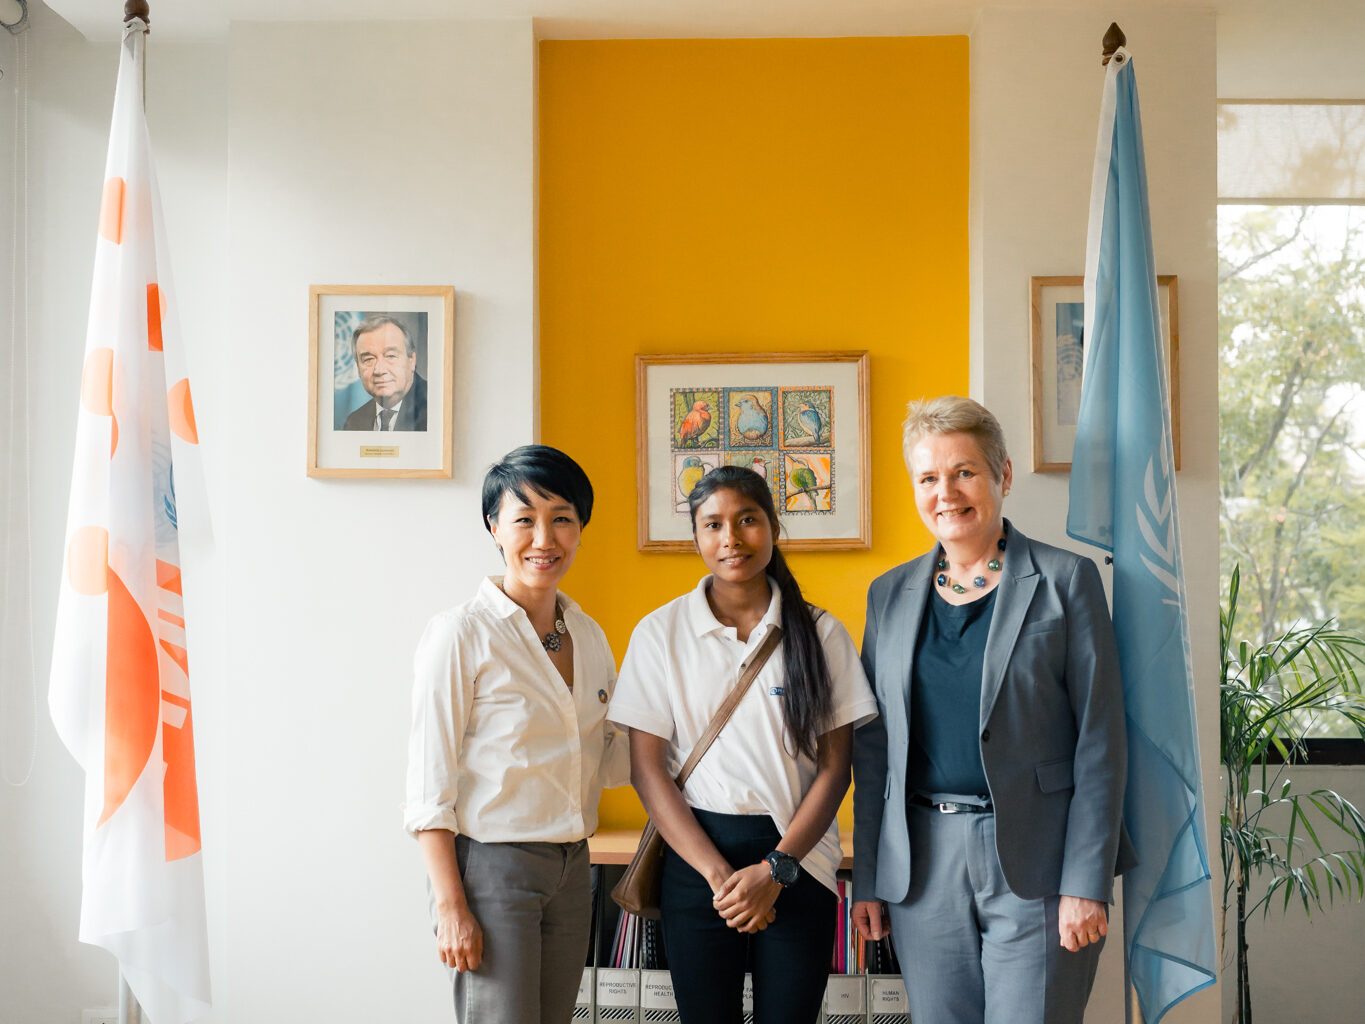 Sangita's visit to UNFPA Nepal and meeting Ms. Young, the Country Representative.